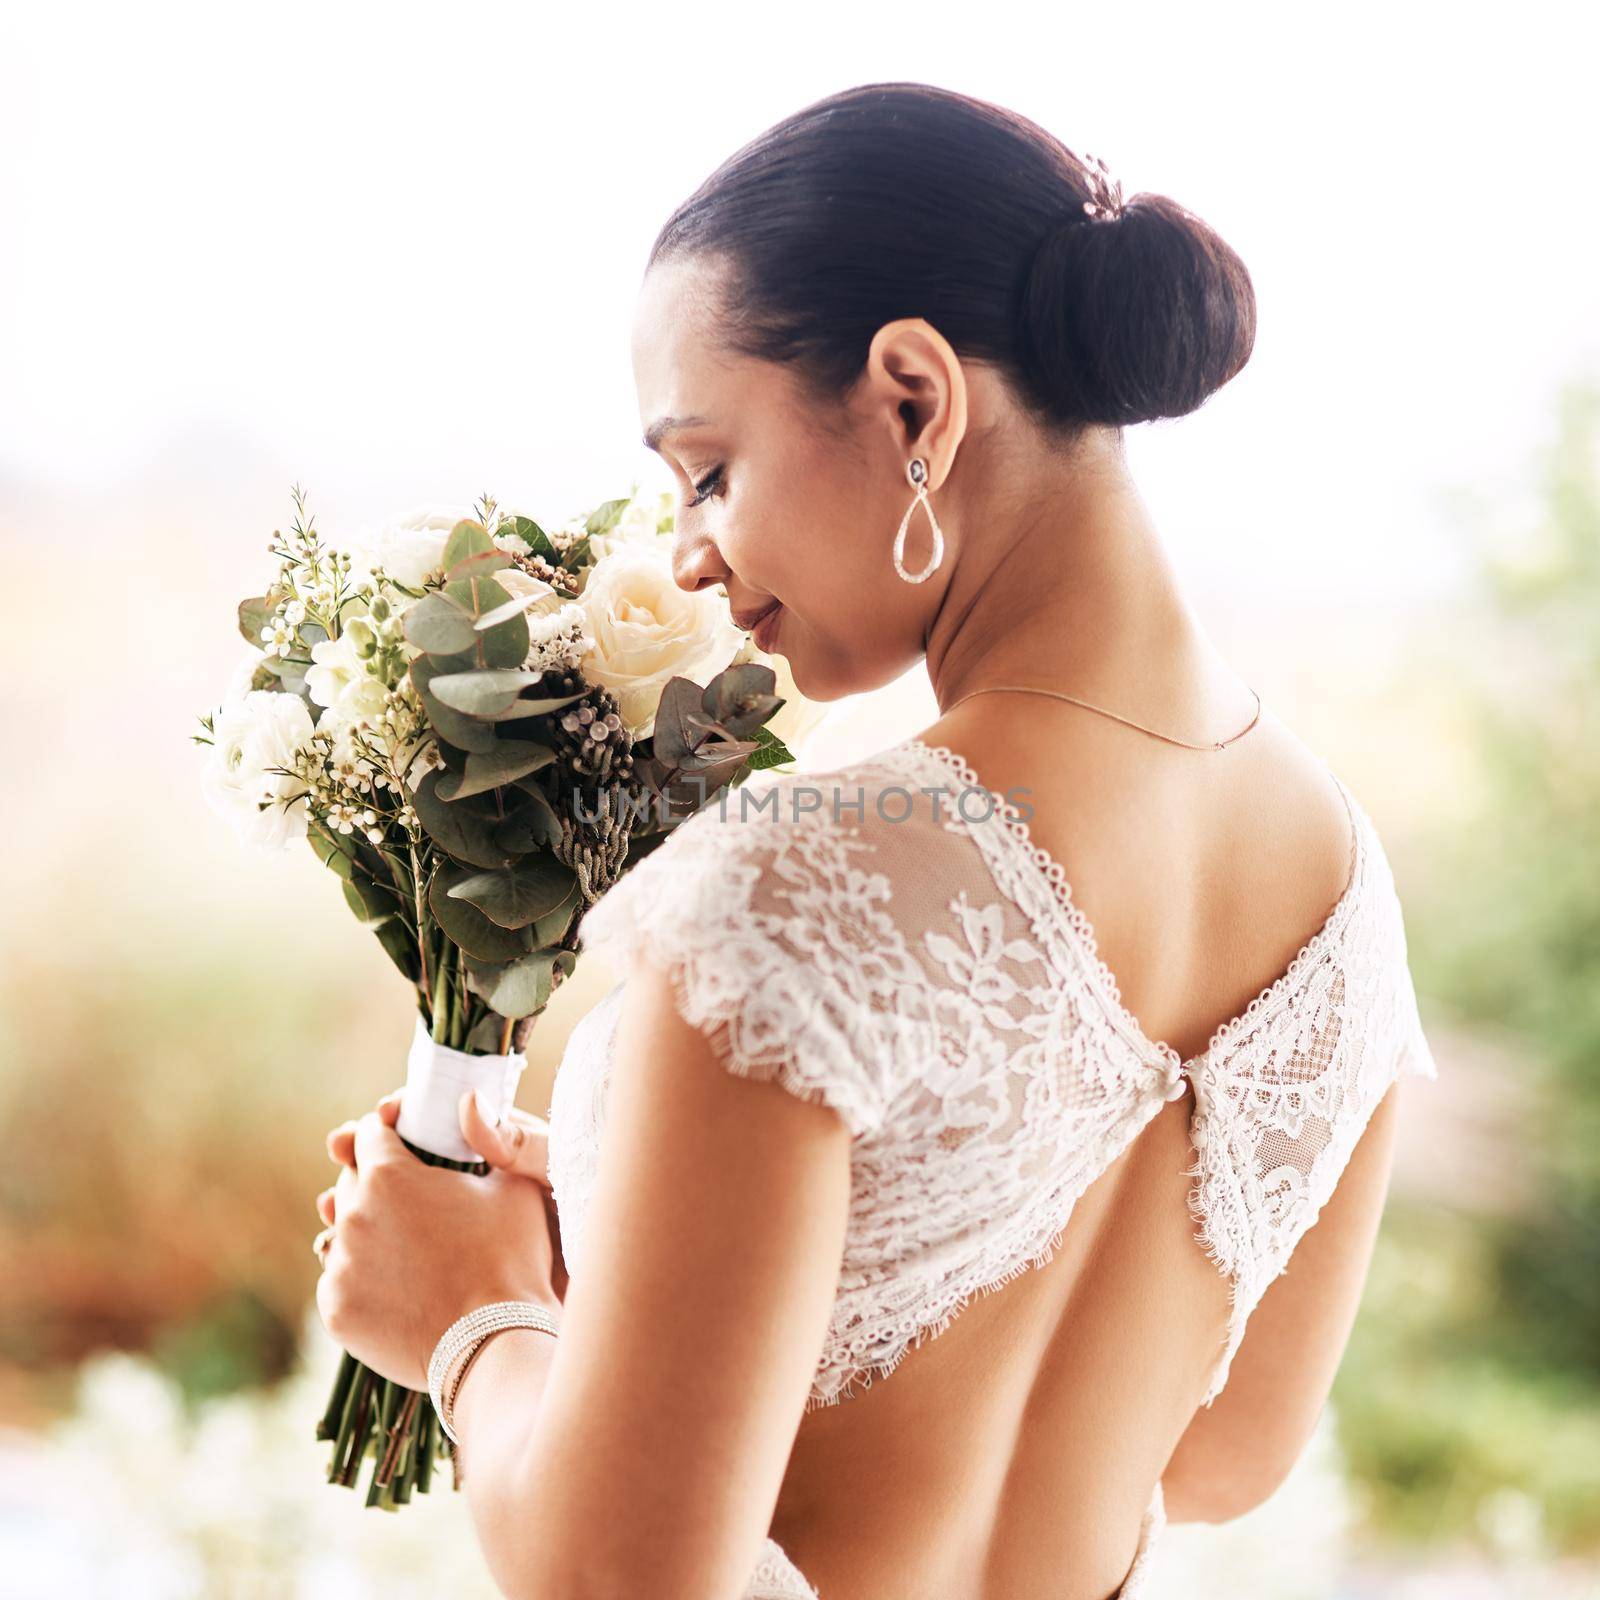 The scent of love. a beautiful young bride smelling her bouquet of flowers outdoors on her wedding day